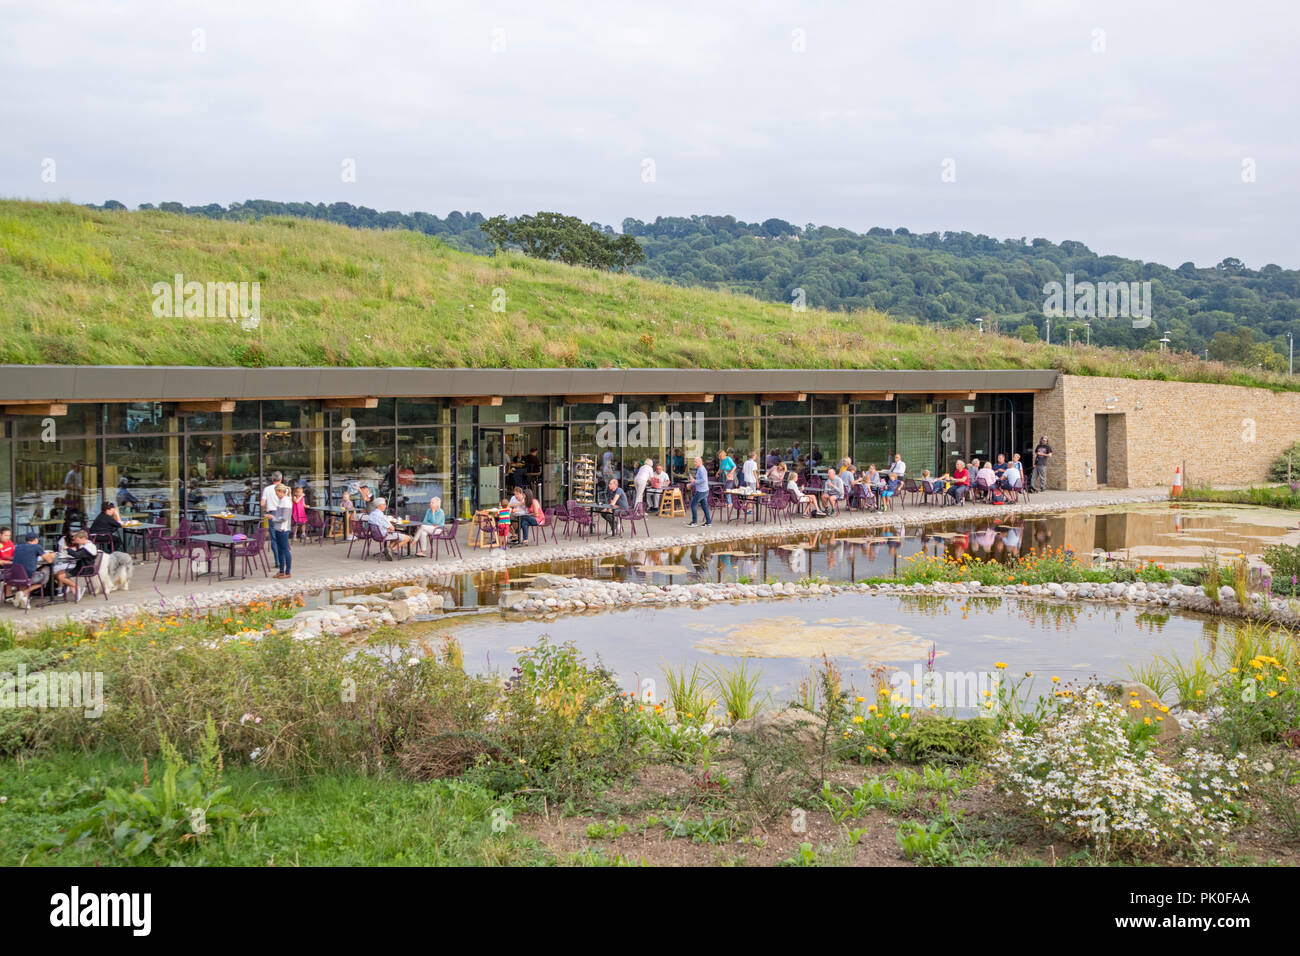 The attractive grounds of Gloucester Services on the north bound M5 motorway, Gloucestershire, England, UK Stock Photo